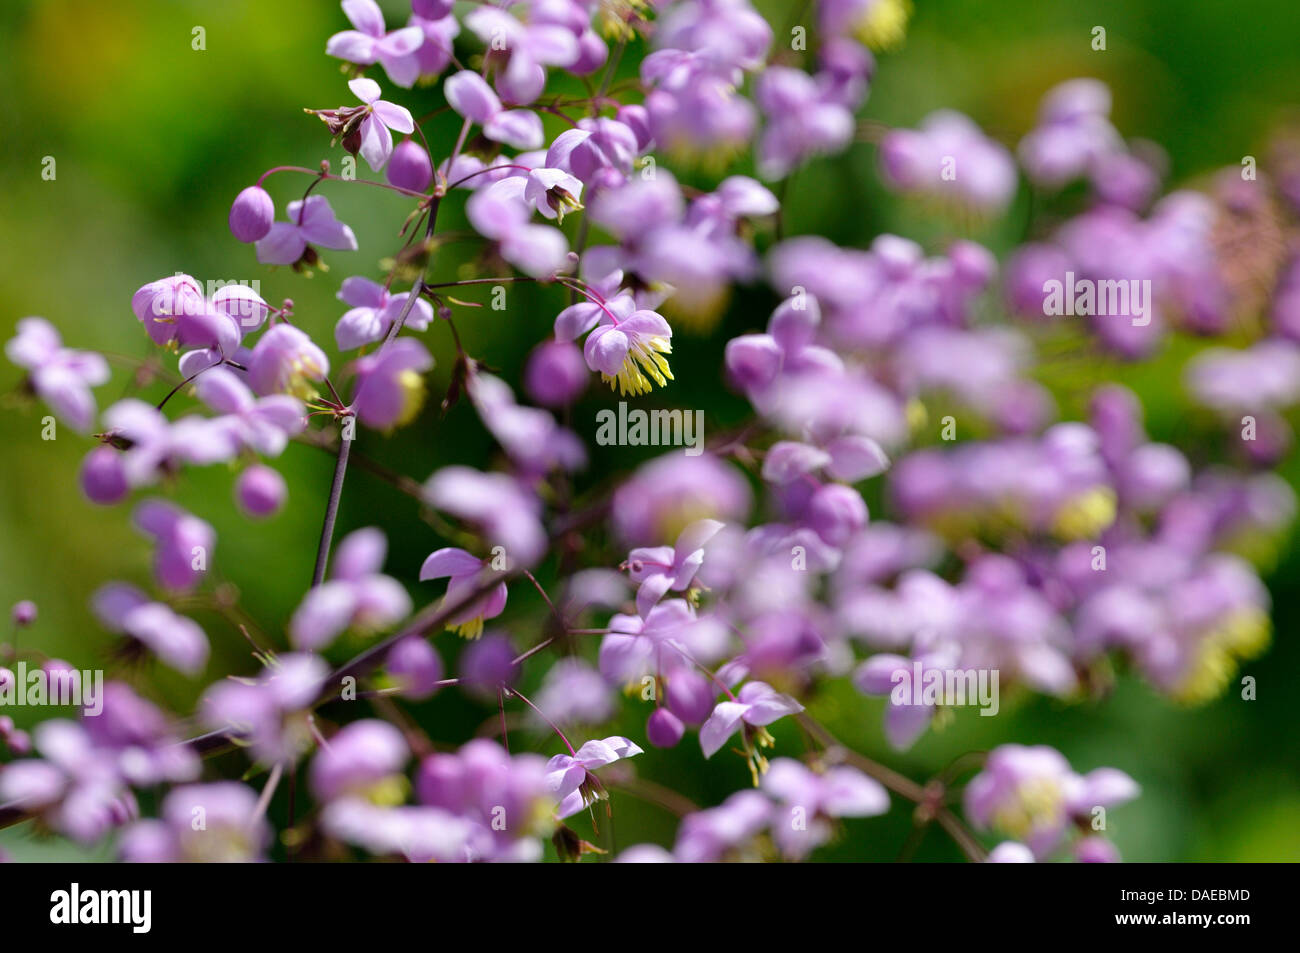 Chinese meadow rue (Thalictrum delavayi), blooming Stock Photo